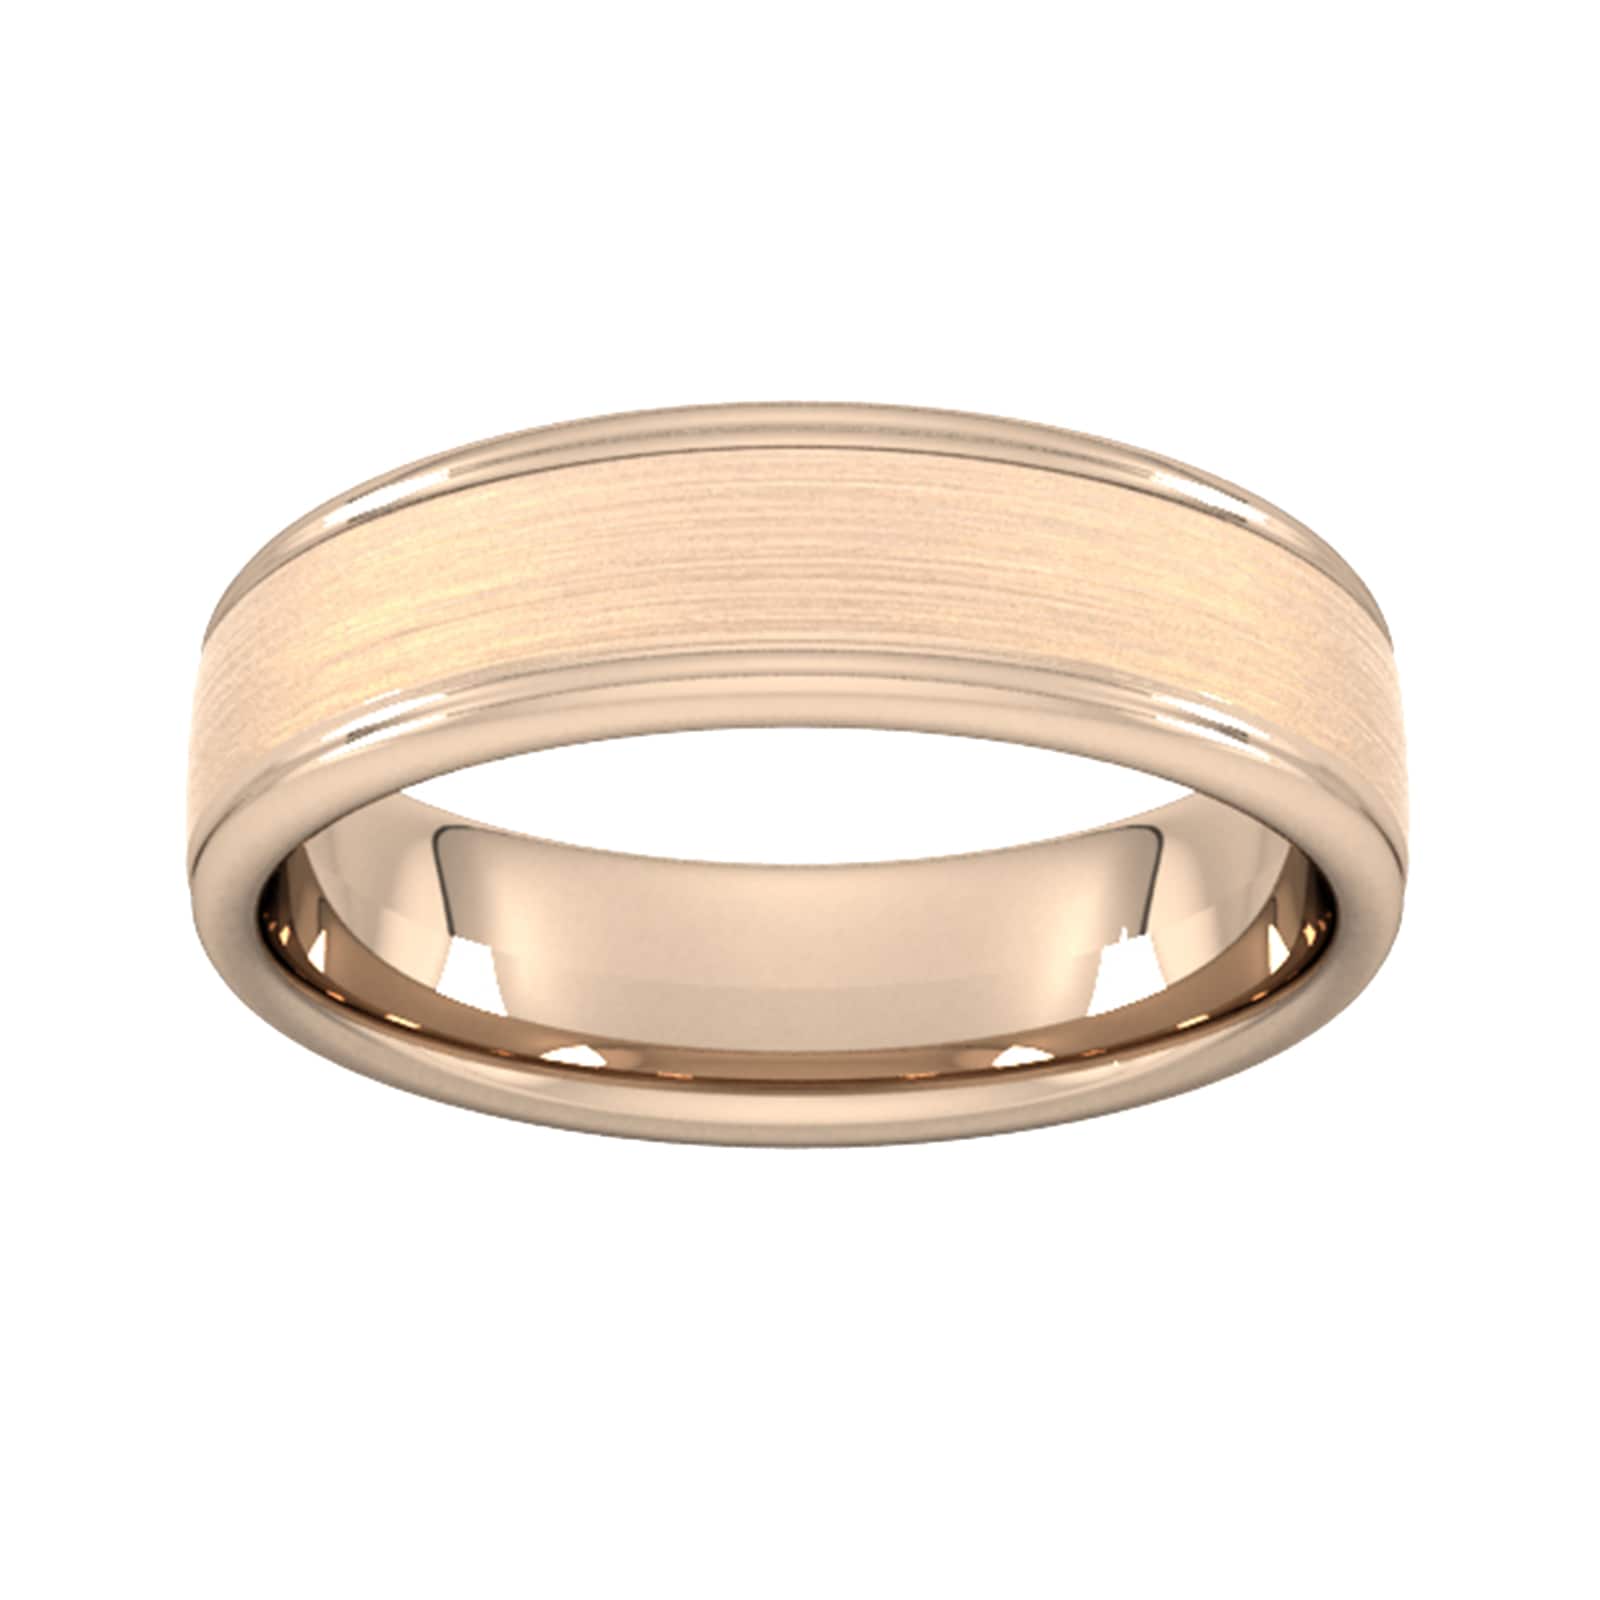 6mm Slight Court Extra Heavy Matt Centre With Grooves Wedding Ring In 9 Carat Rose Gold - Ring Size Z